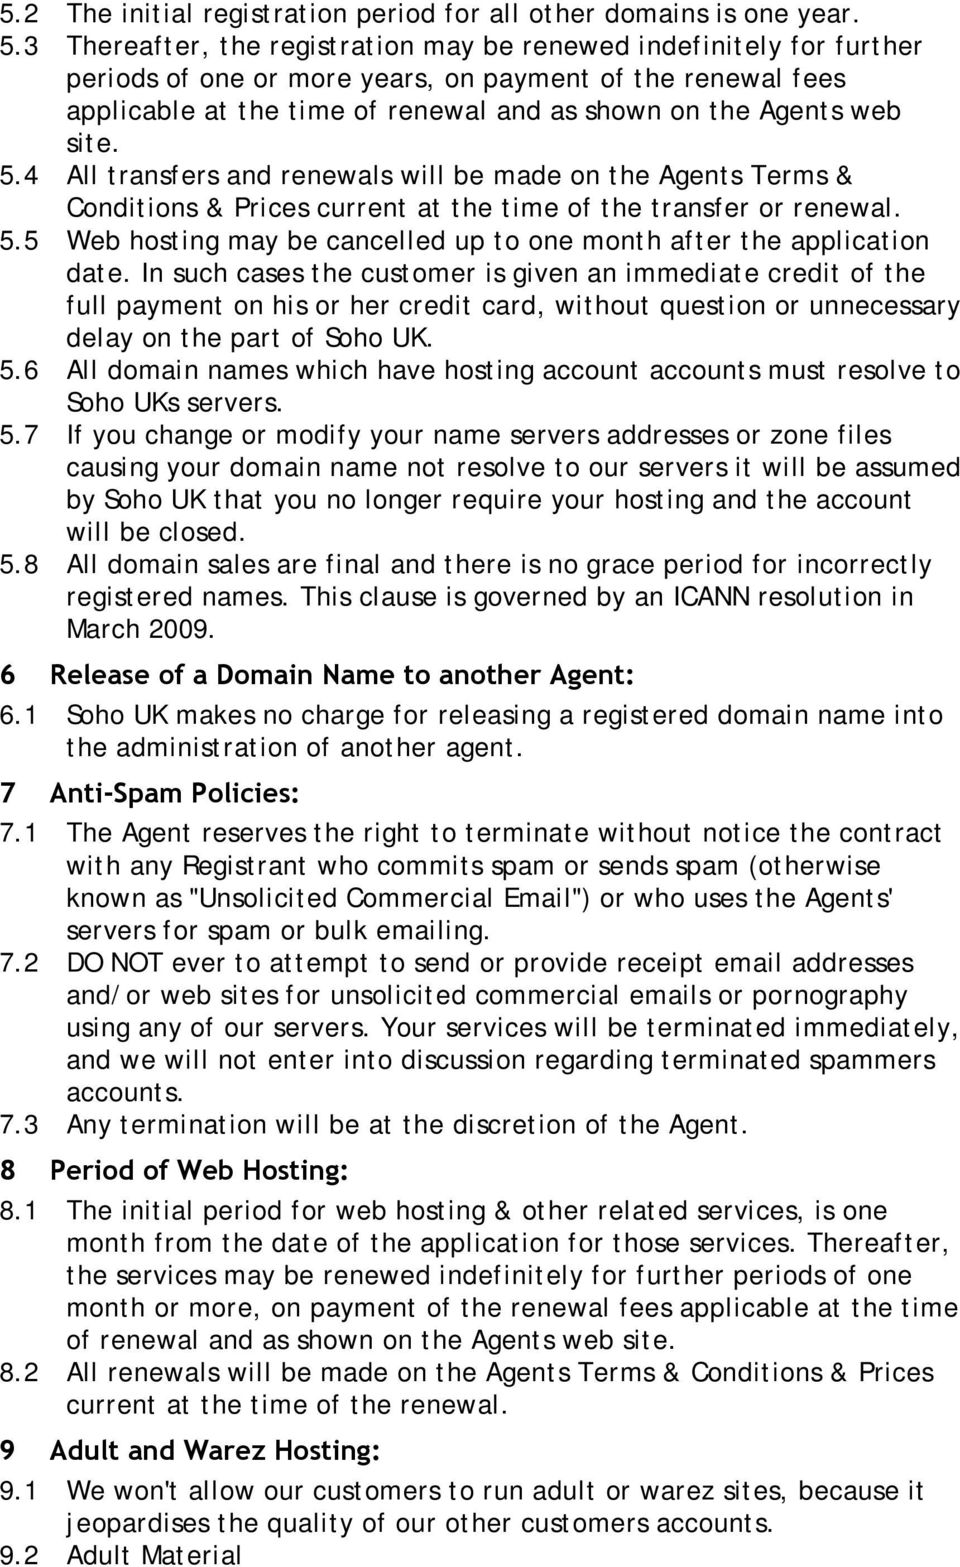 site. 5.4 All transfers and renewals will be made on the Agents Terms & Conditions & Prices current at the time of the transfer or renewal. 5.5 Web hosting may be cancelled up to one month after the application date.